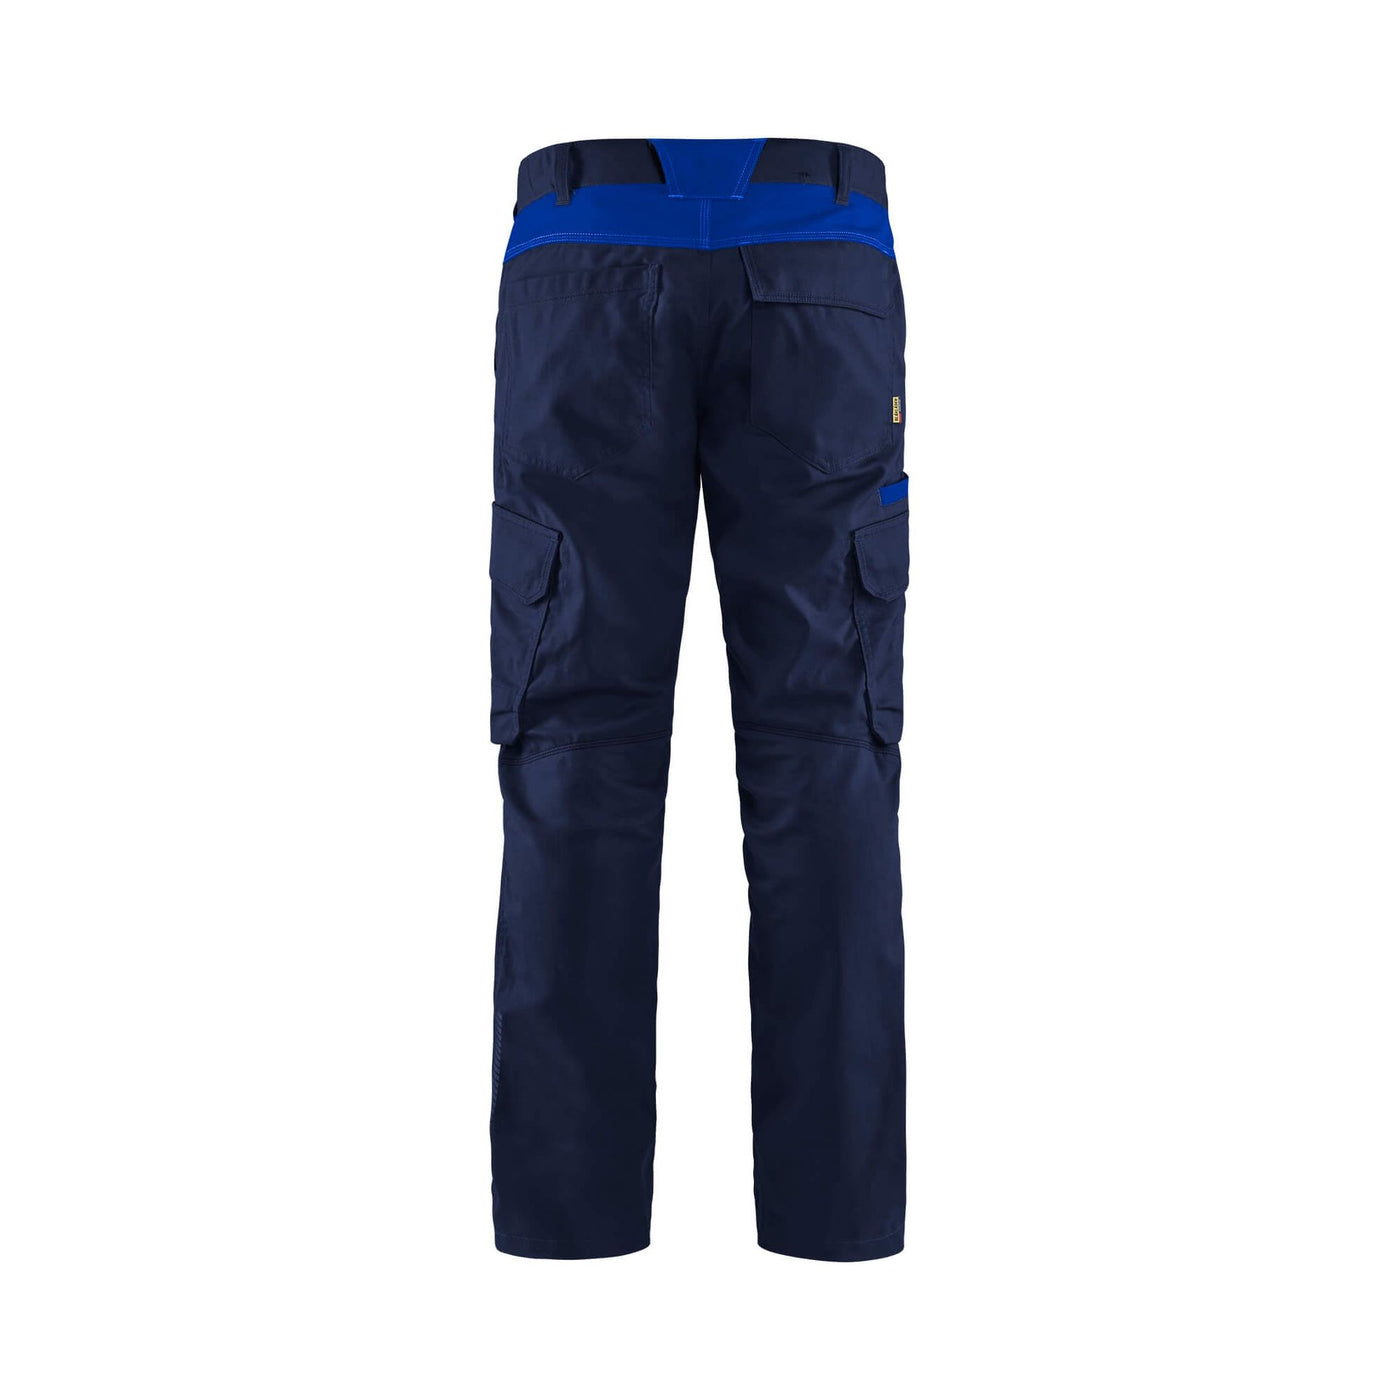 Blaklader 14441832 Industry Trousers Stretch Navy Blue/Cornflower Blue Rear #colour_navy-blue-cornflower-blue